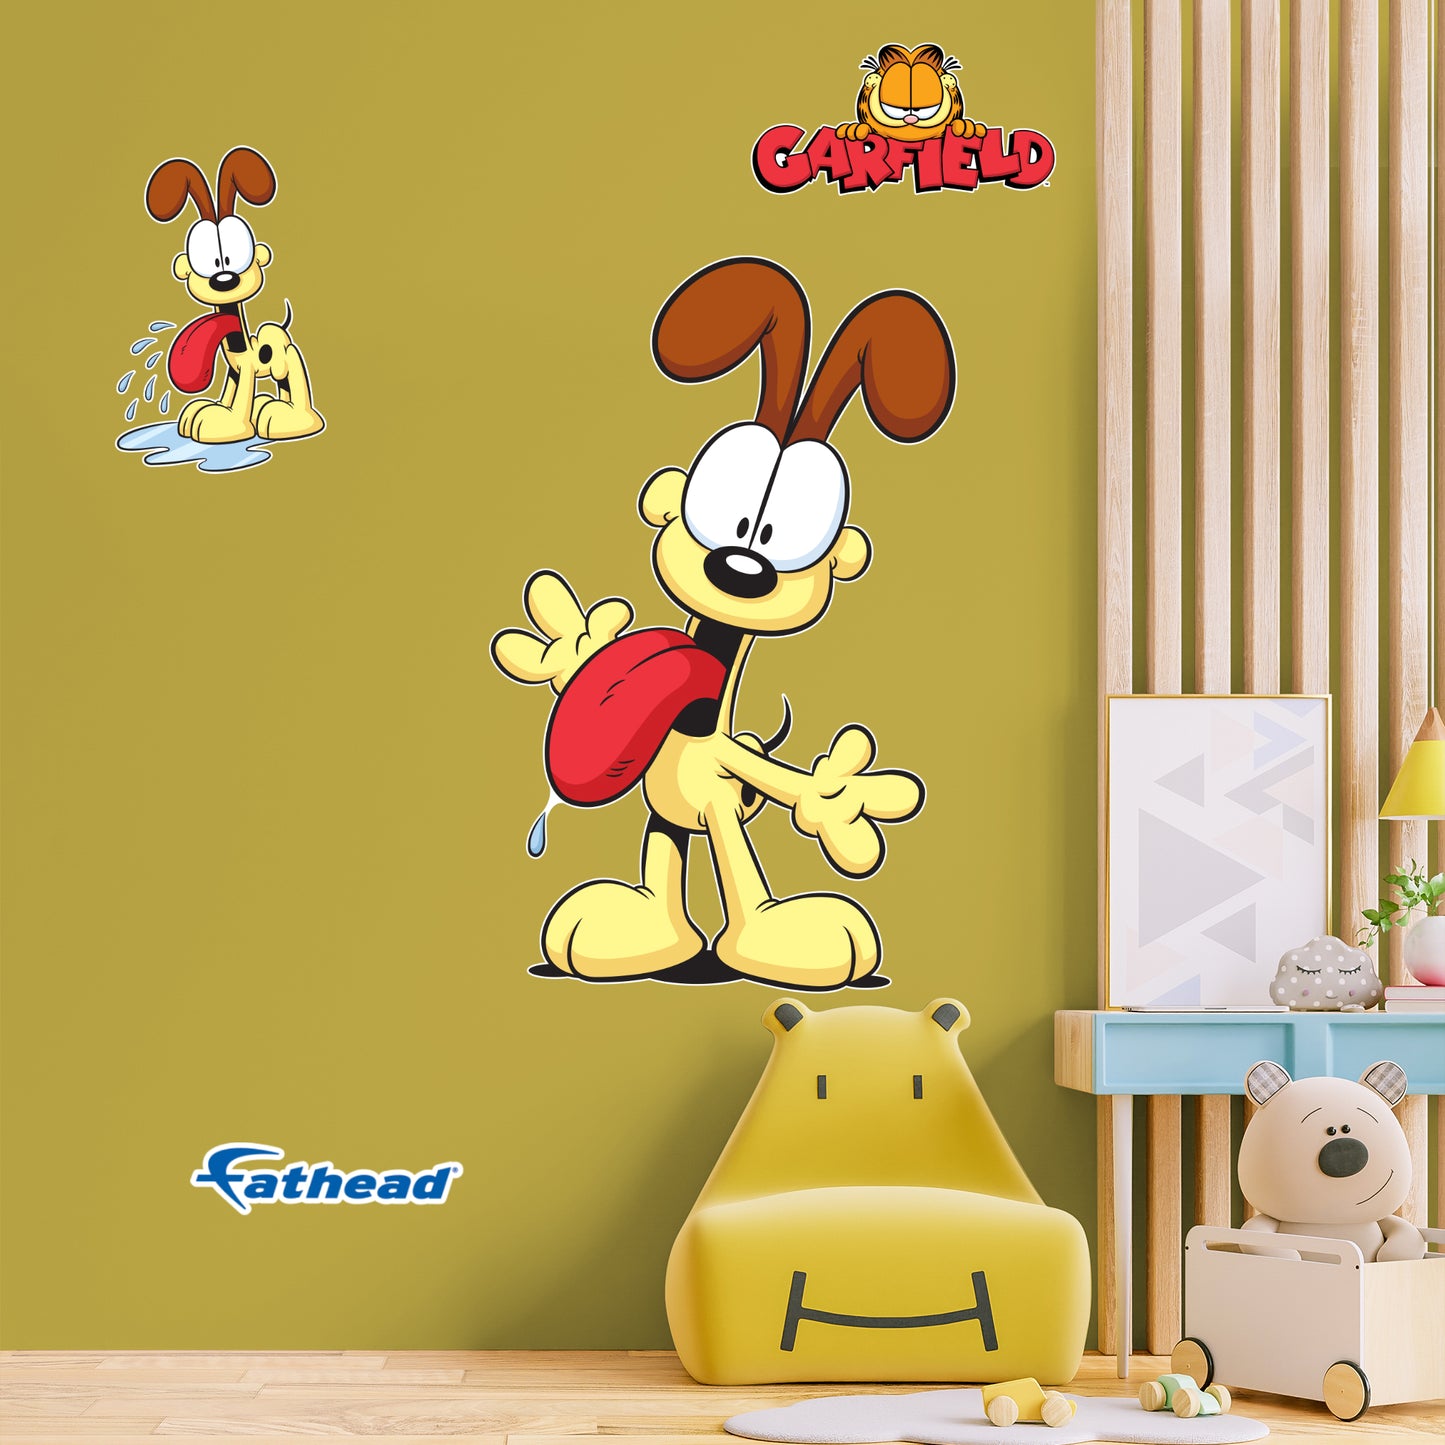 Garfield: Odie RealBig        - Officially Licensed Nickelodeon Removable     Adhesive Decal